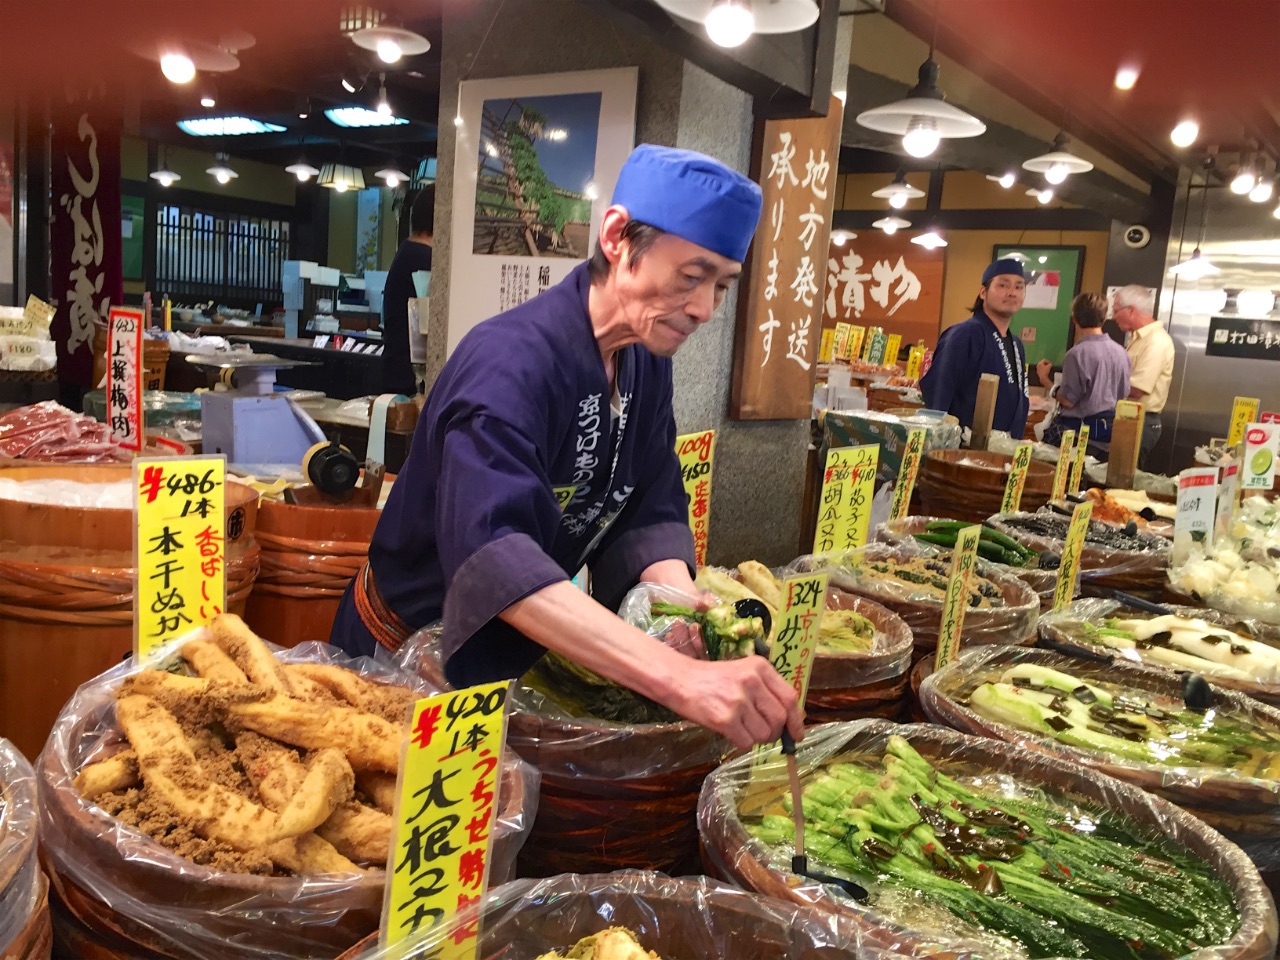 1 – Pickles and other traditional Japanese delicacies.